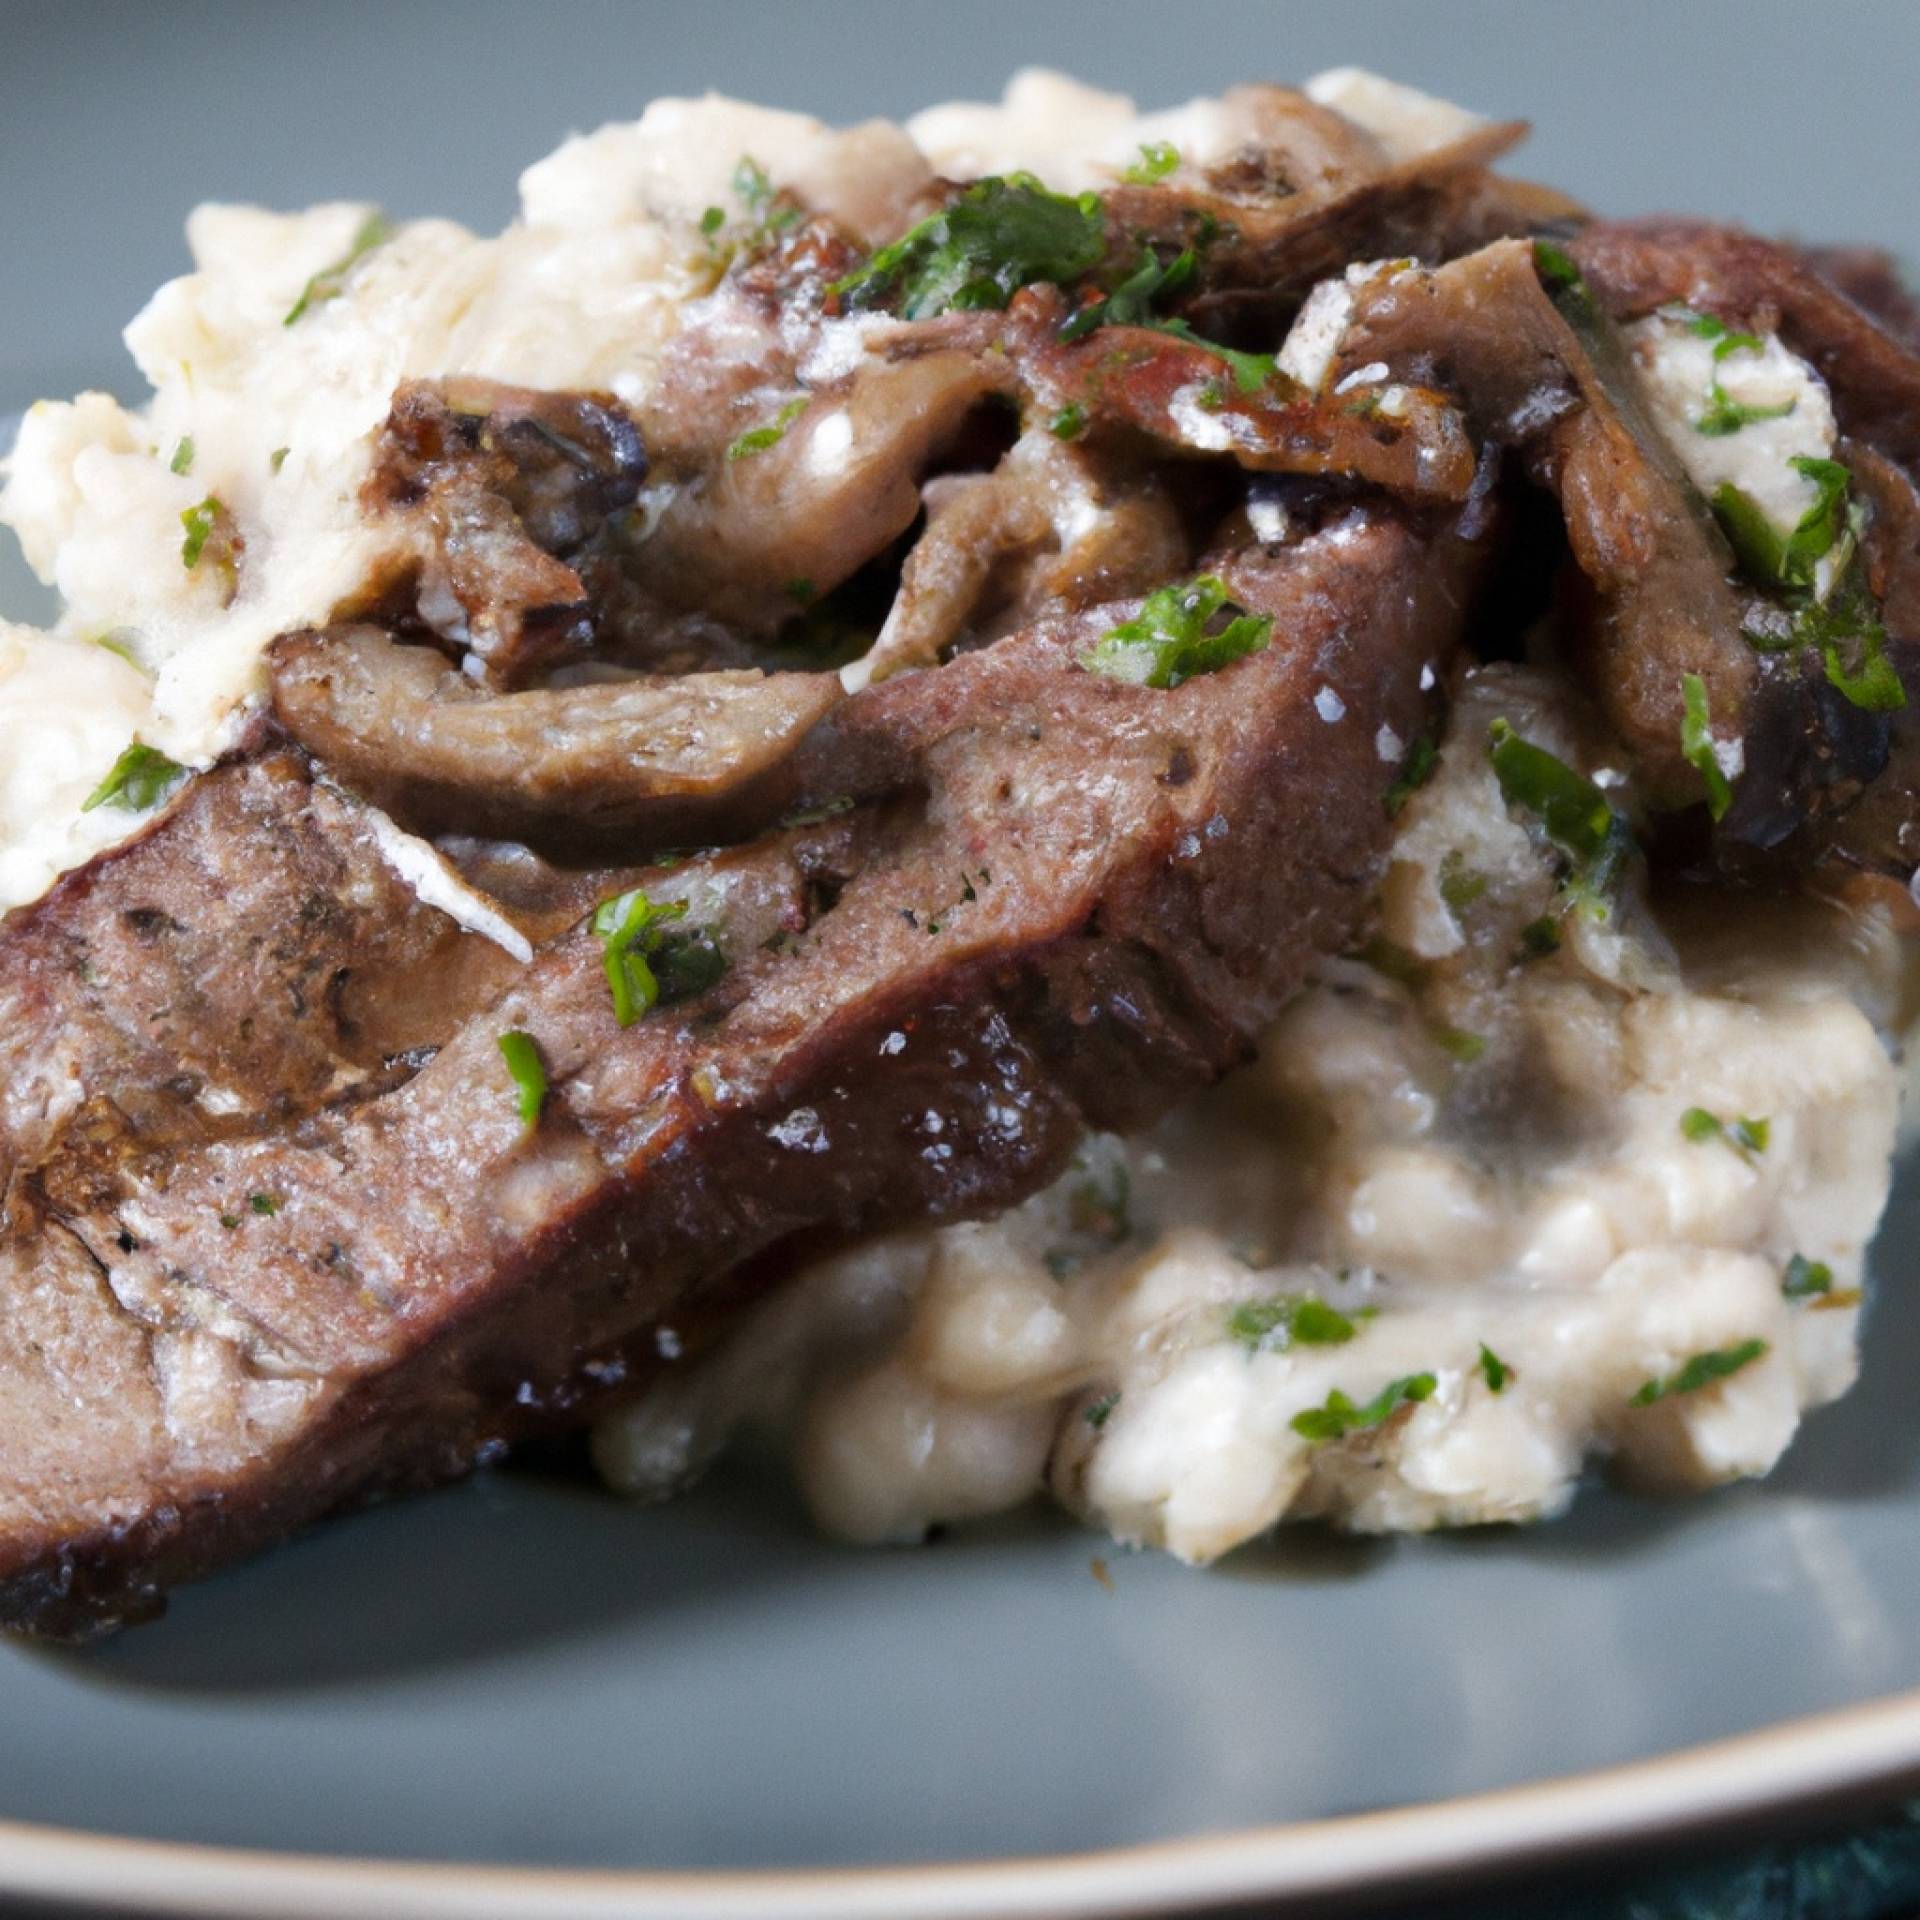 Grilled Flank Steak with Chive Risotto with Mushroom Sauce